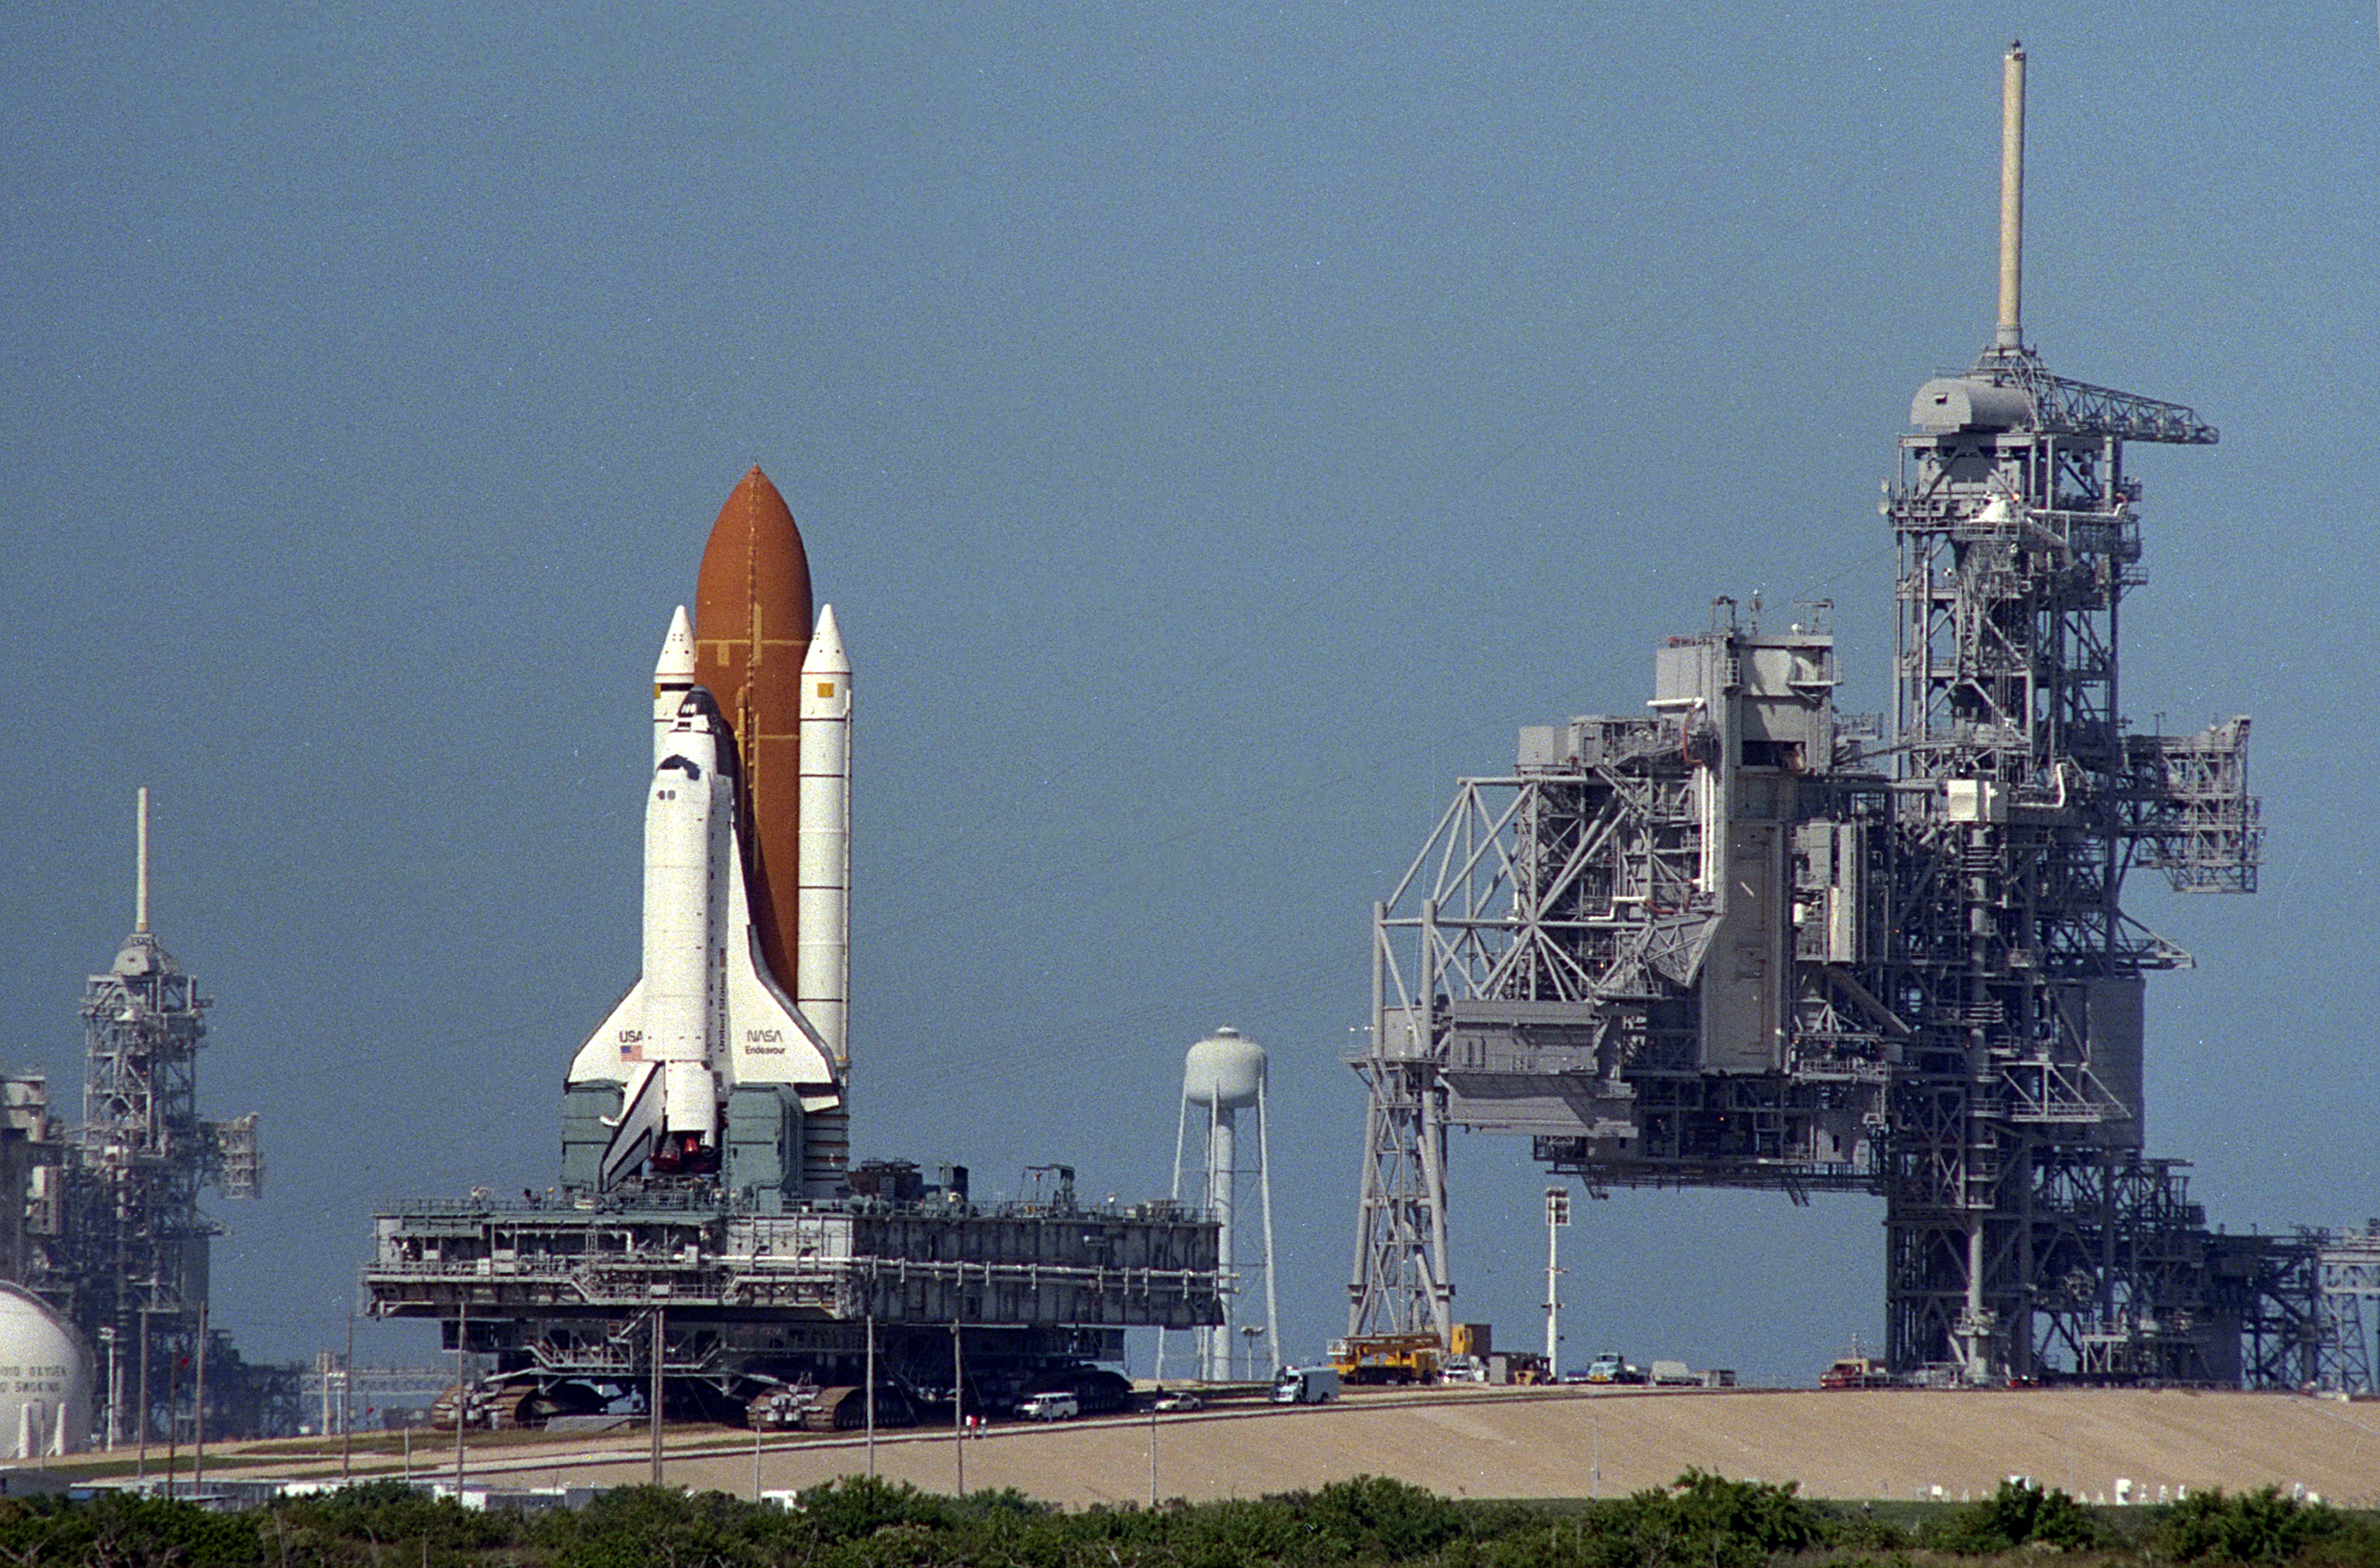 Endeavour rolls over from Launch Pad 39A to 39B at NASA’s Kennedy Space Center in Florida